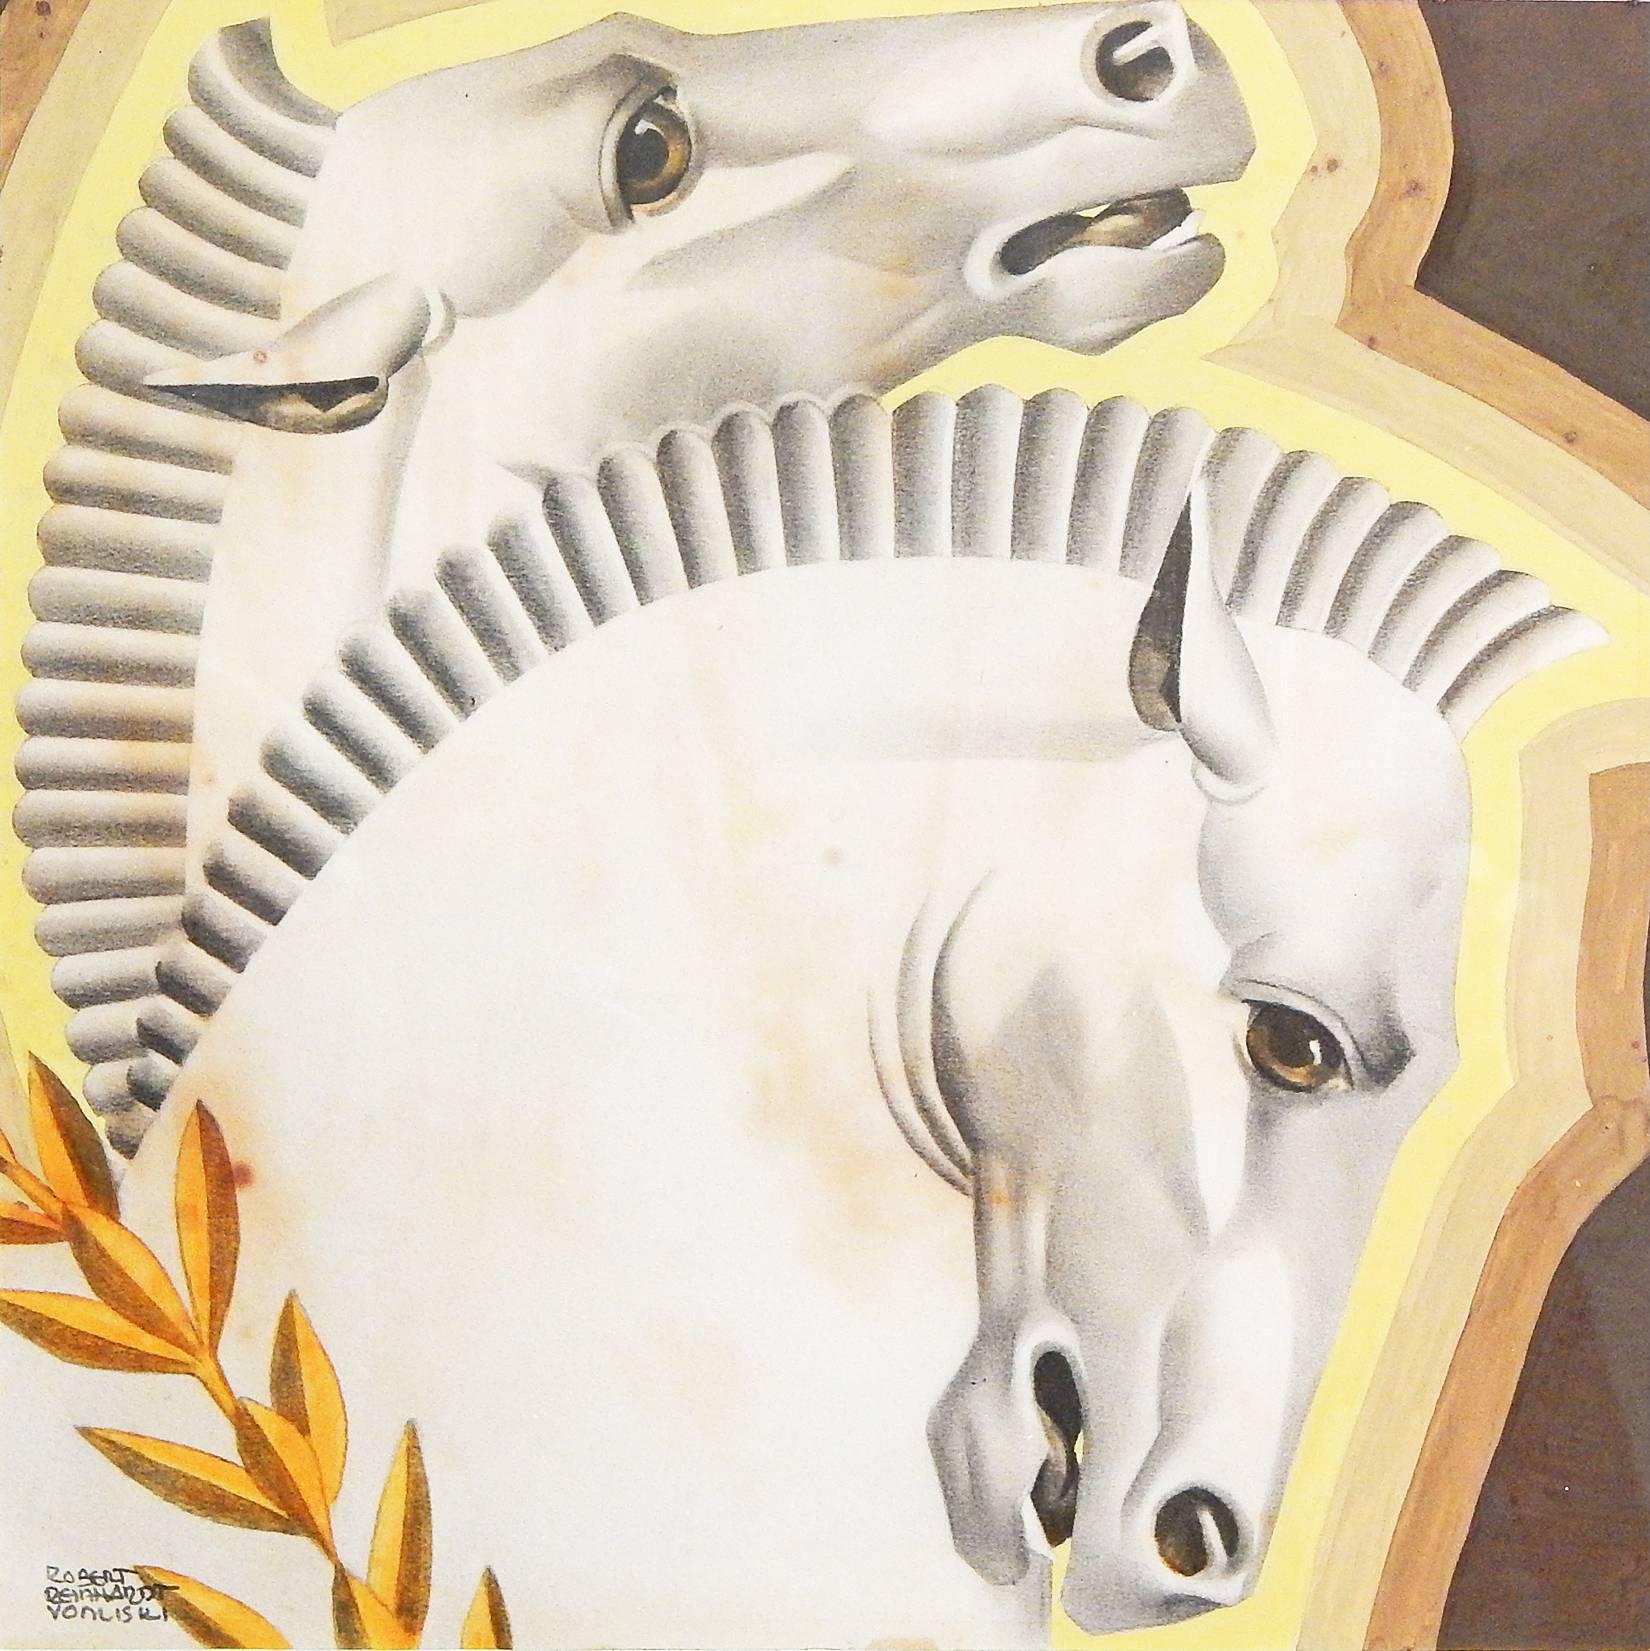 This extraordinary pair of Art Deco pieces, each depicting a pair of horses, one with its head up and one down, was executed in ink, colored pencil and gouache by Robert Reinhardt Von Liski, a Prussian-American artist. Von Liski worked in Chicago as